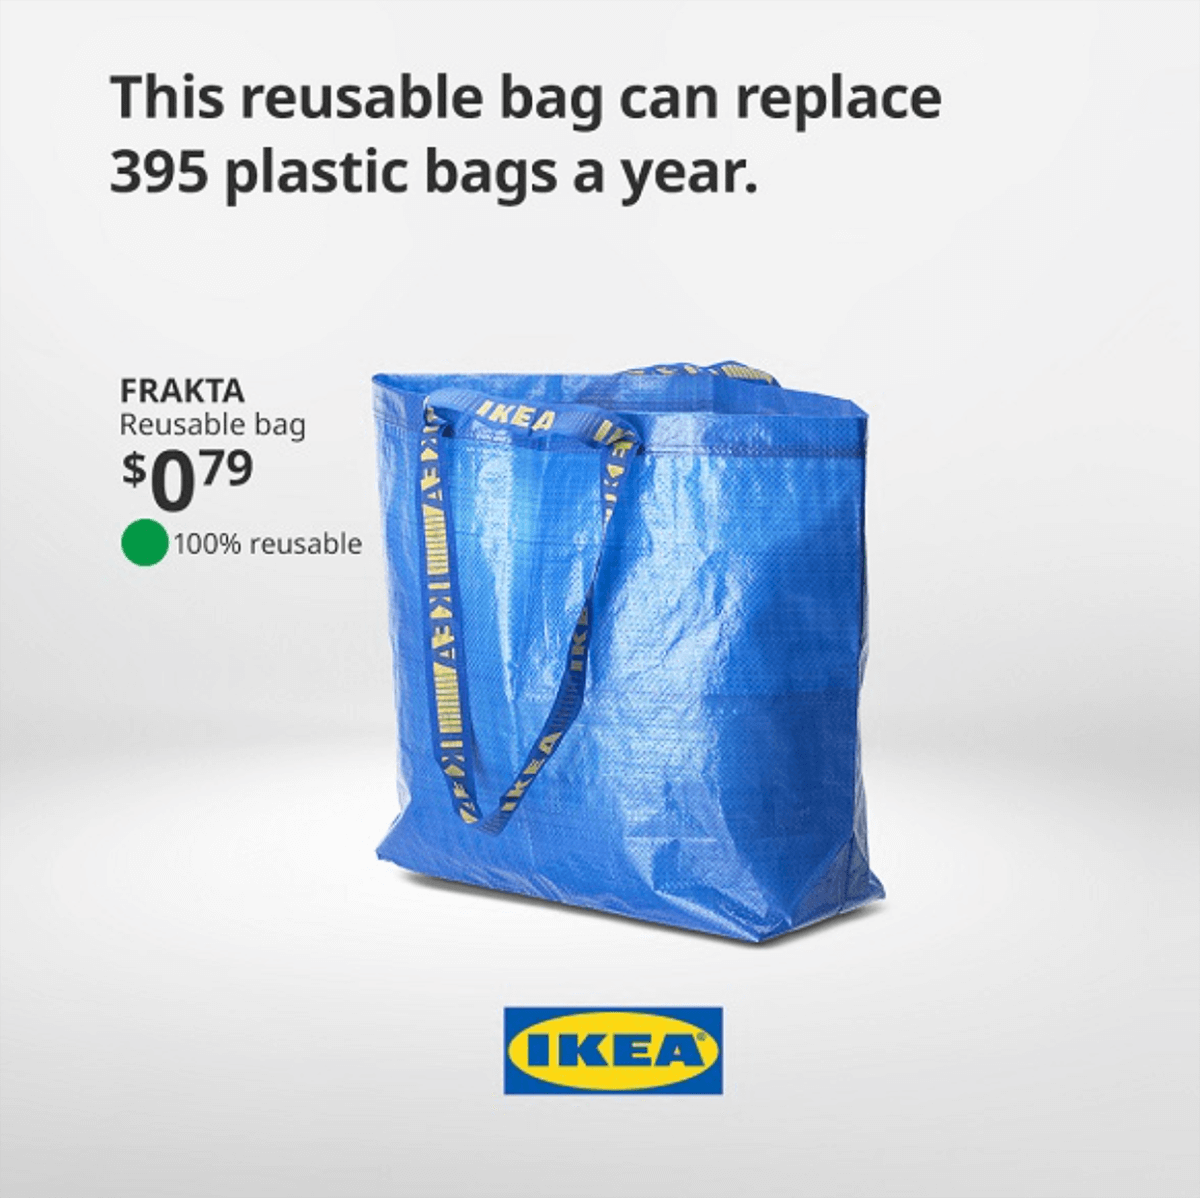 Image of the blue Ikea reusable shopping bag with a statement that the reusable bag can replace 395 plastic bags a year. 